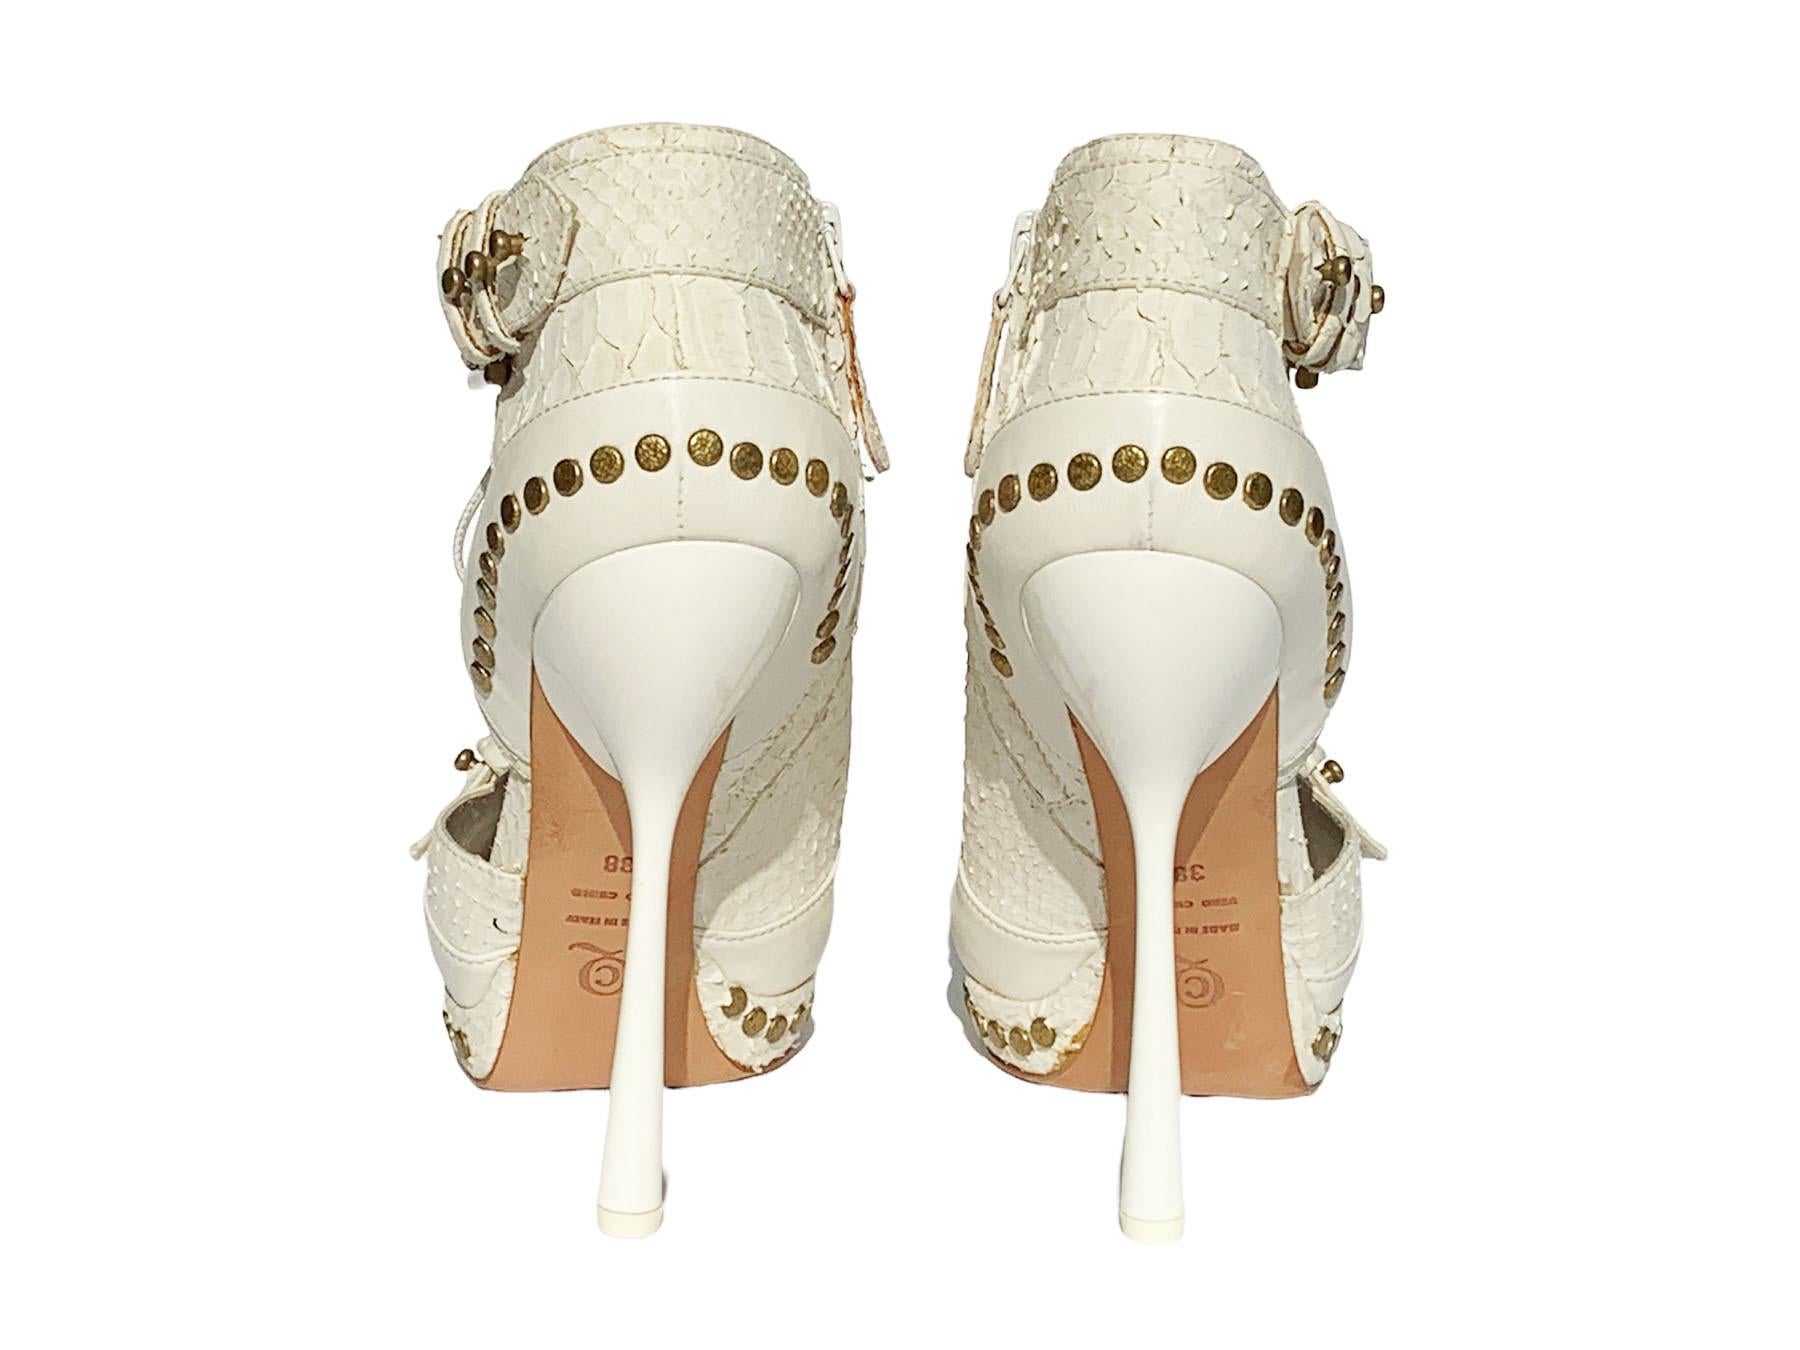 New Alexander McQueen S/S 2011 Oyster White Snake Studded Ankle Boots 38 - US 8 In New Condition For Sale In Montgomery, TX